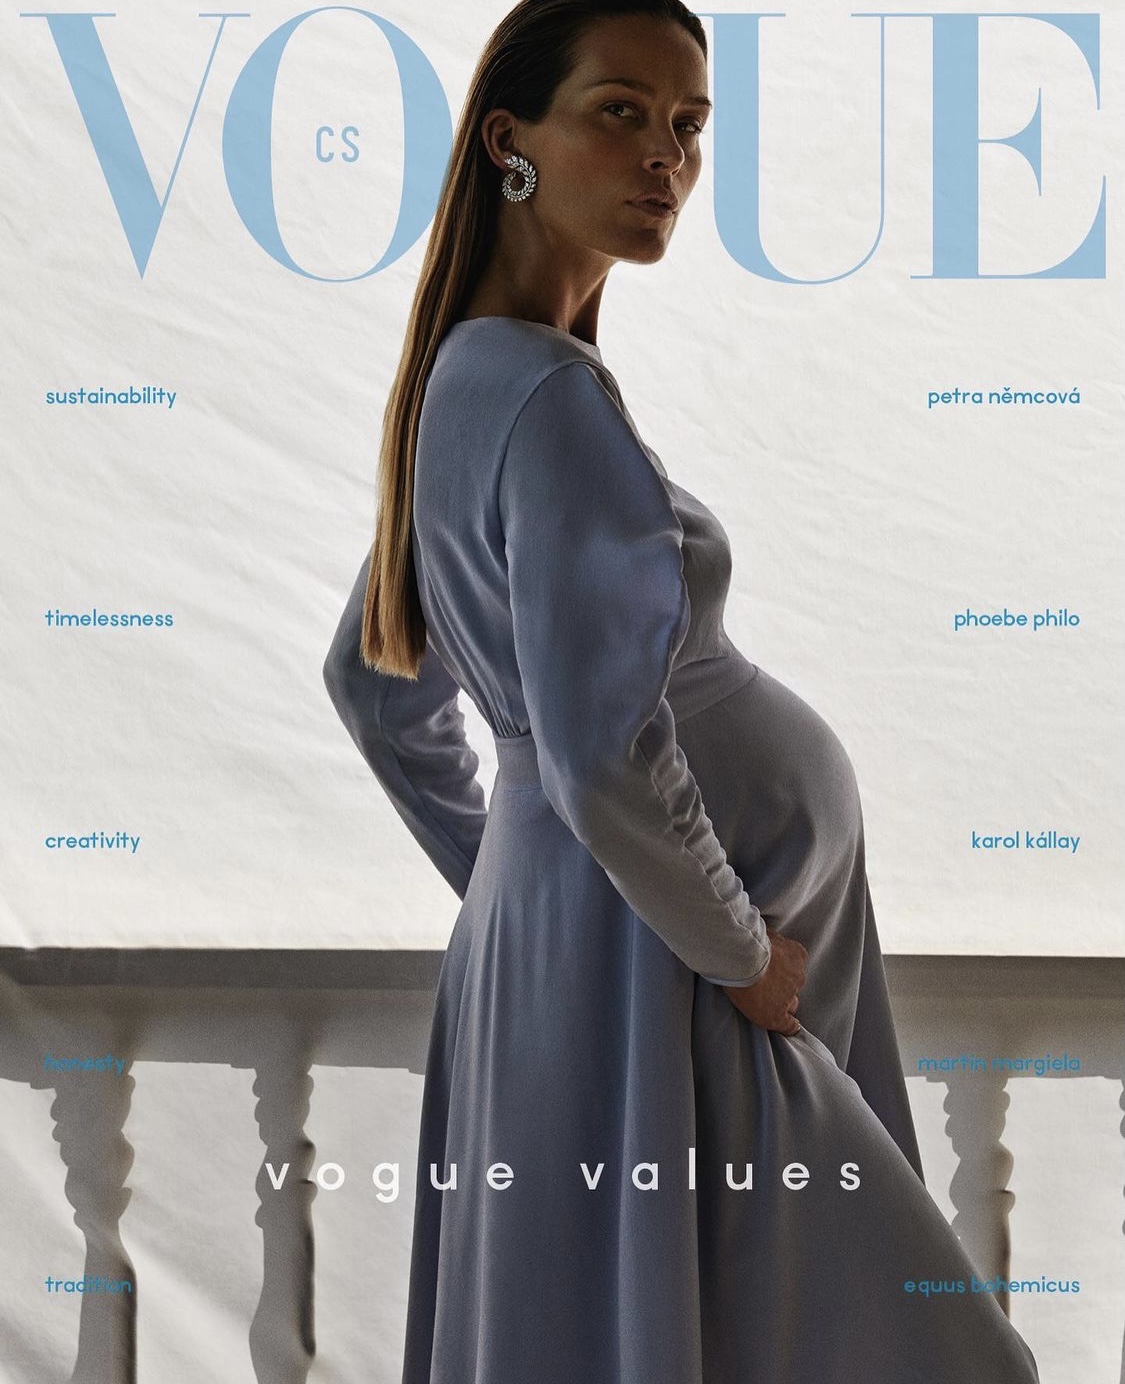 BEQUARTII on the cover of Vogue Magazine